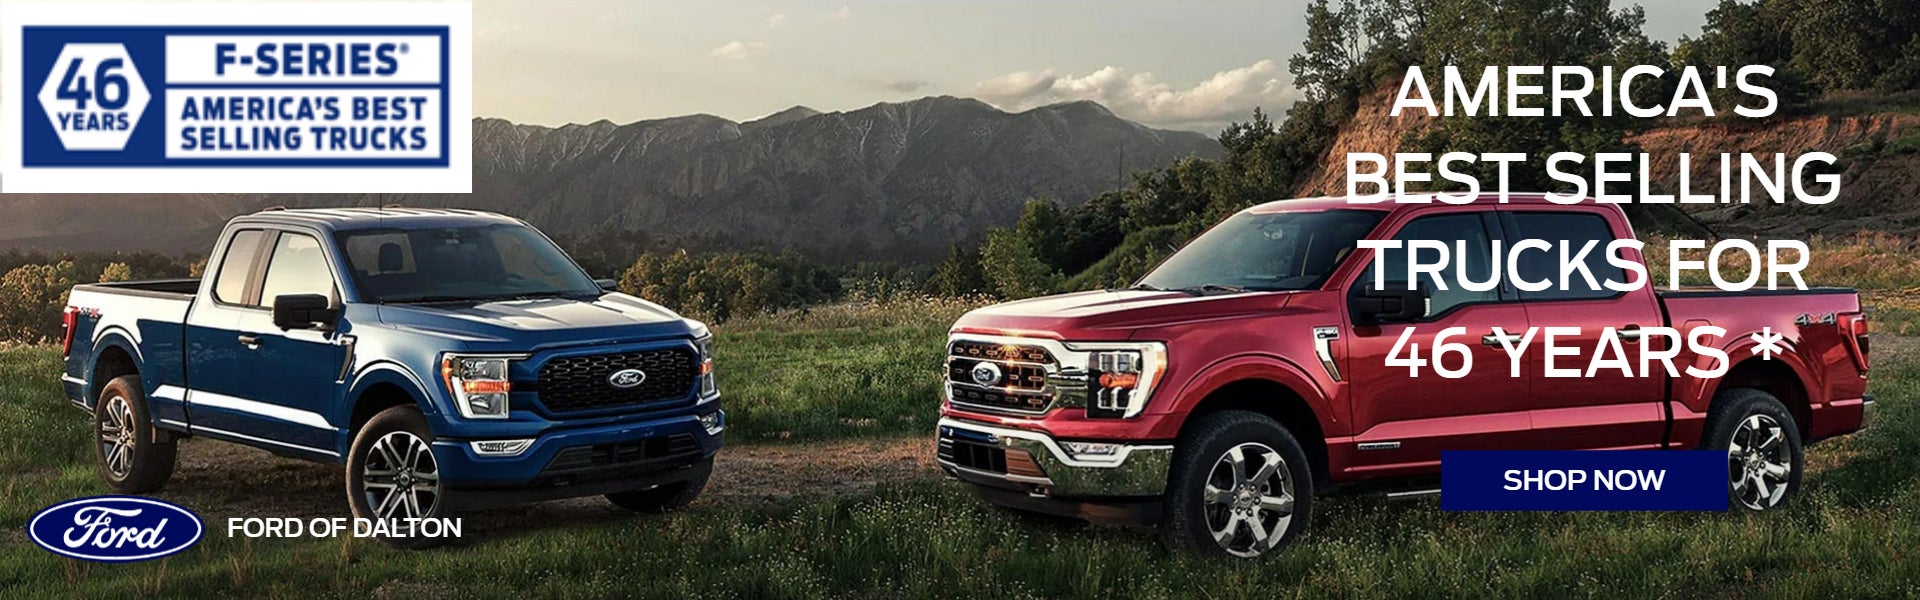 F- Series America's Best Selling Trucks For 46 Years